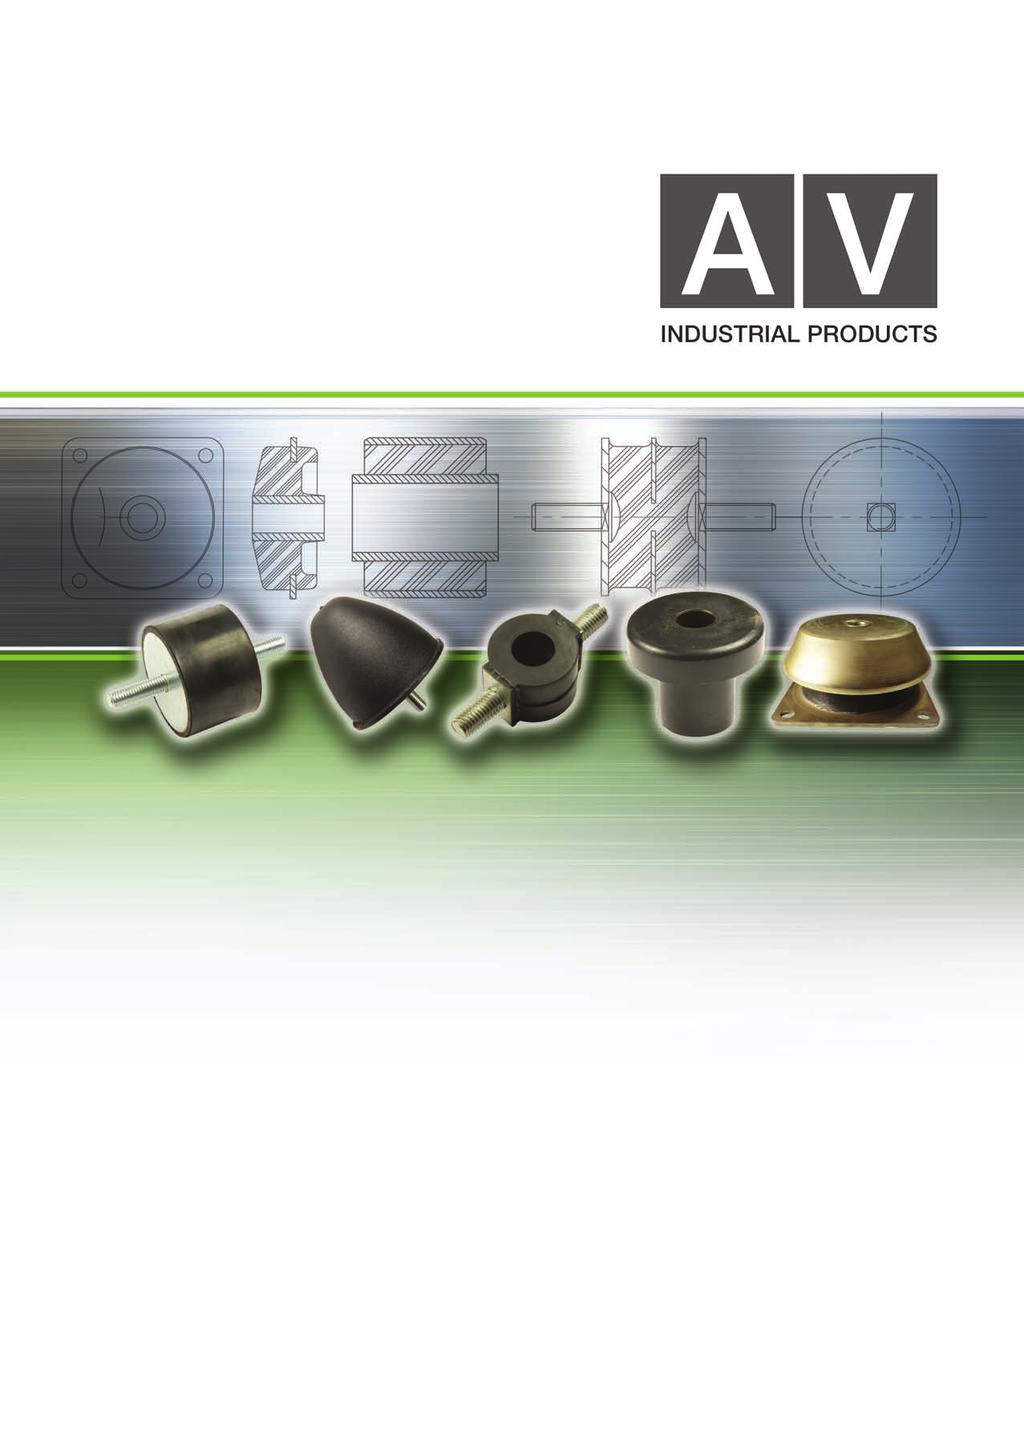 Specialists in Anti-Vibration